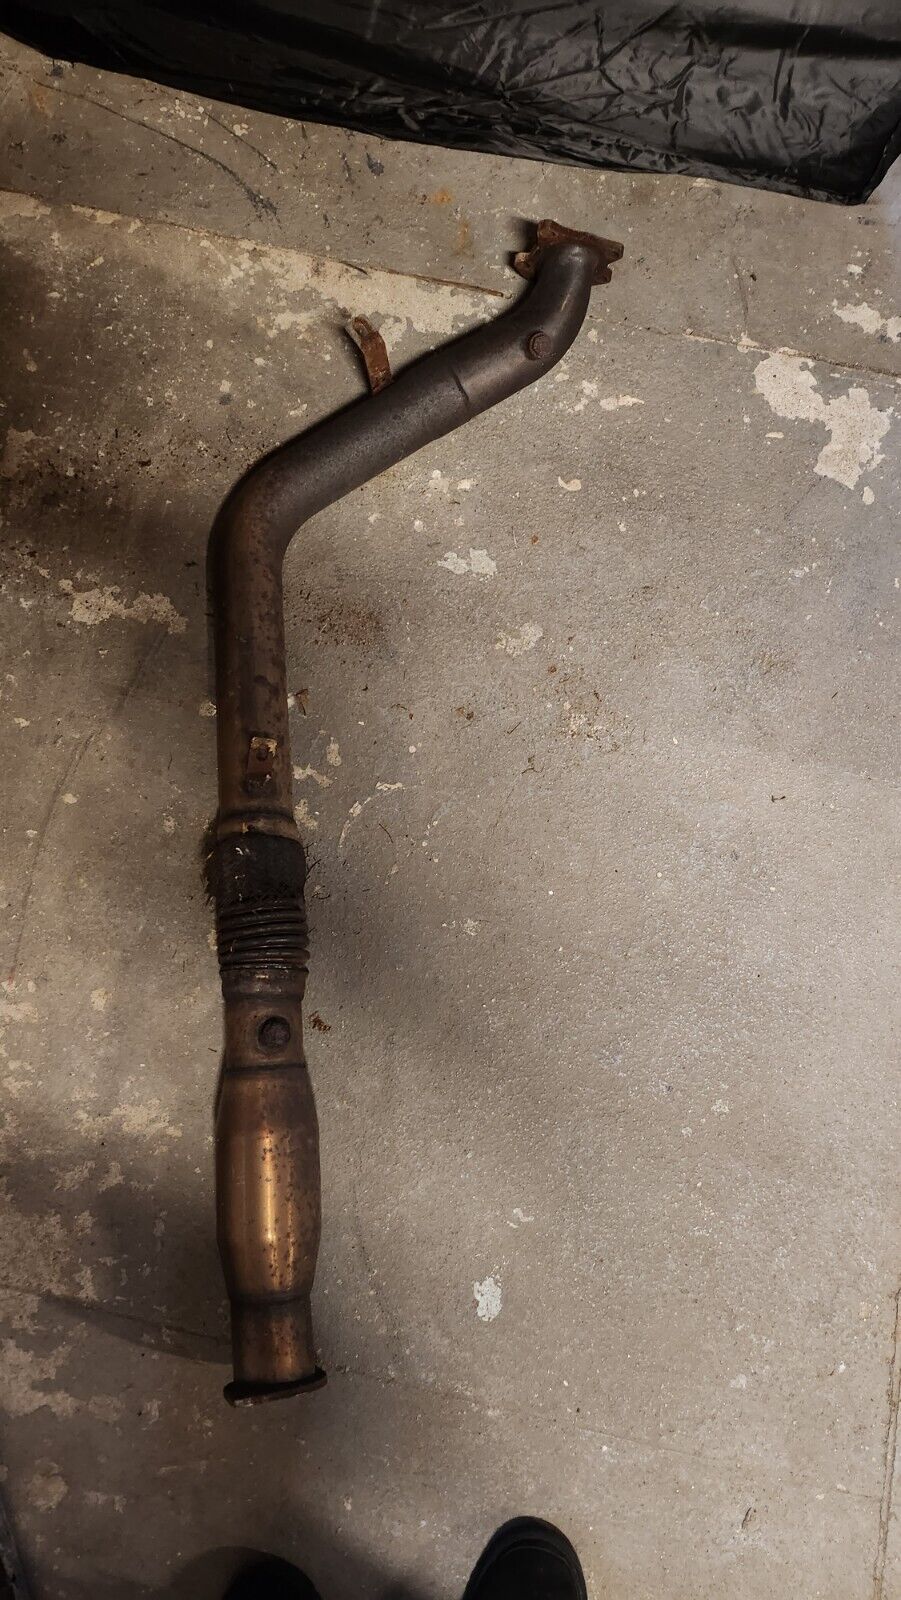 2002 Subaru Wrx 3inch Catted Downpipe And Mid Pipe (unknown brand)